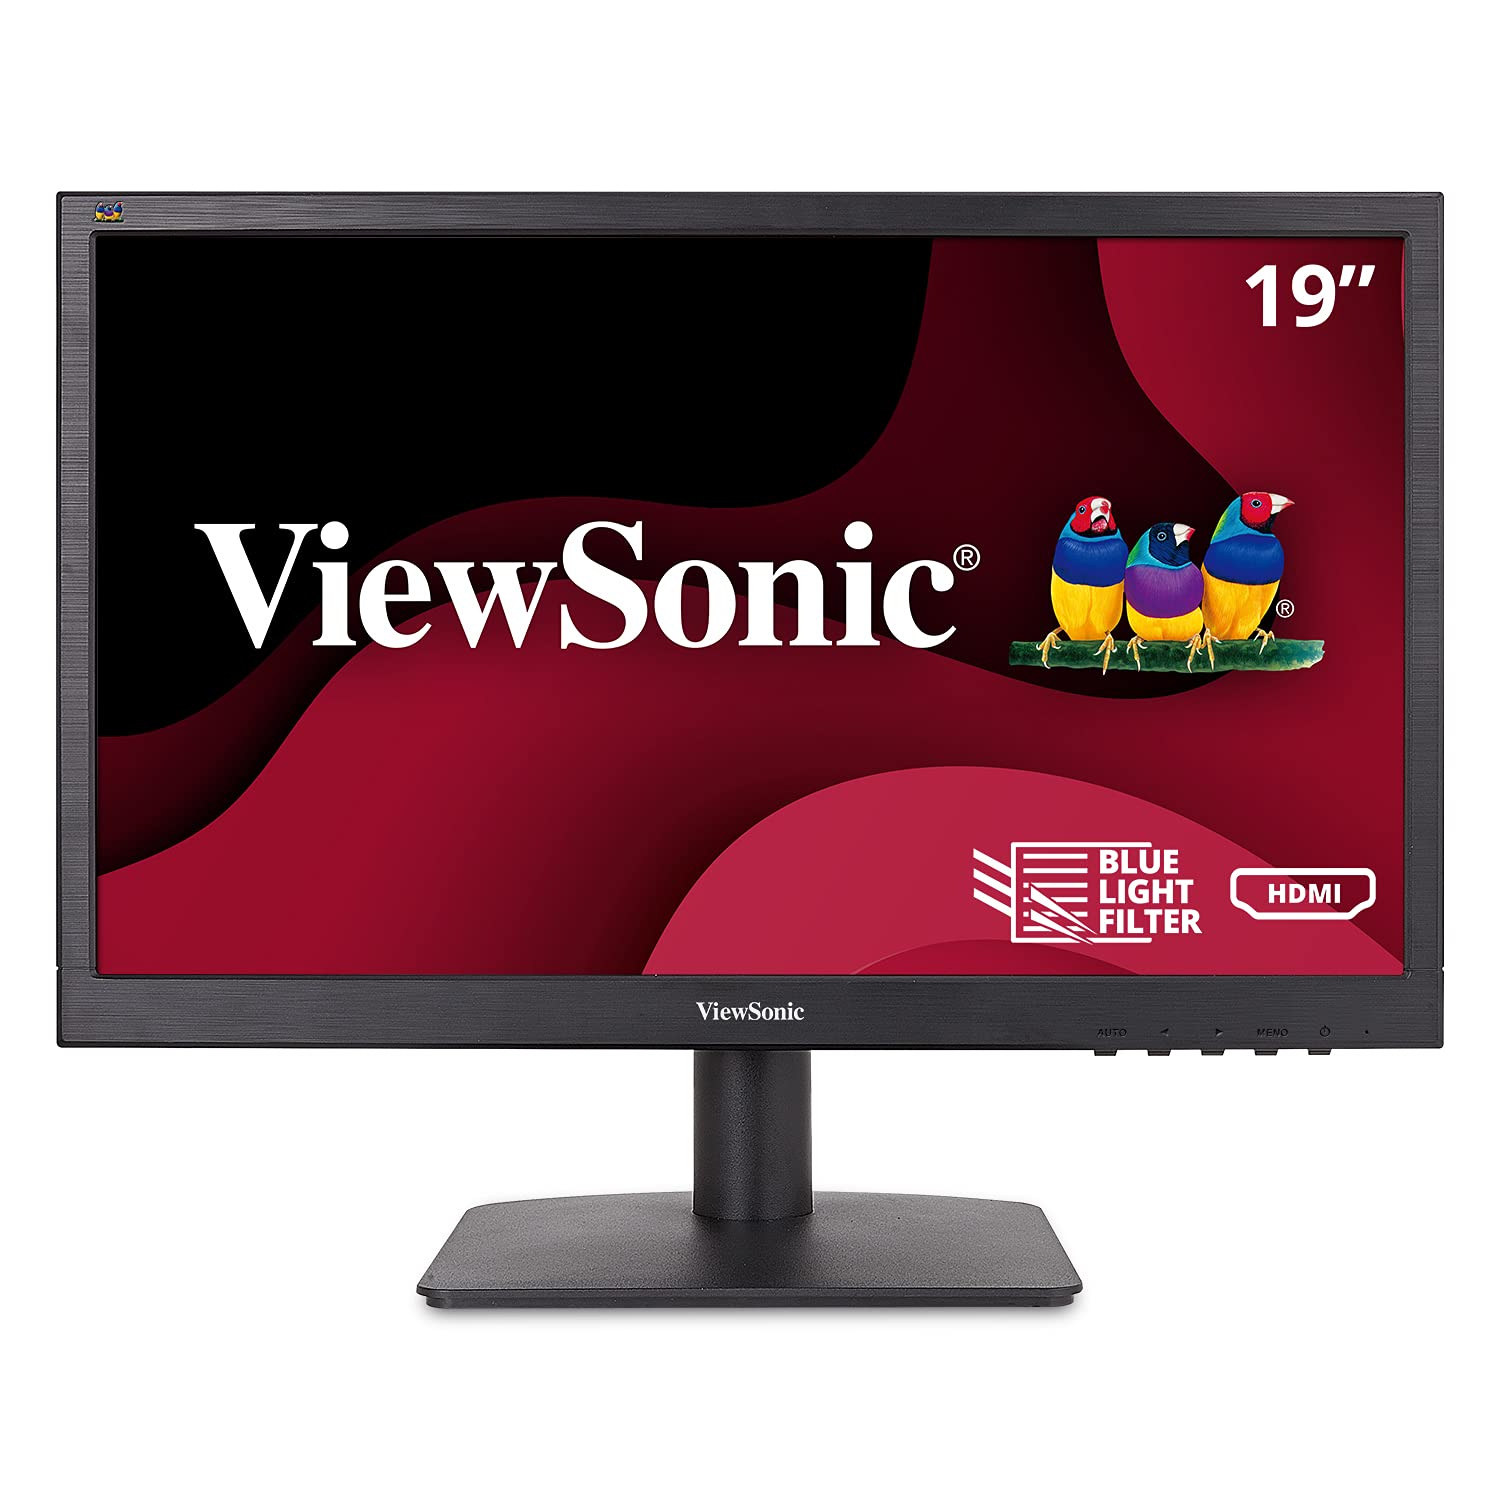 Viewsonic VA1903H 19-Inch WXGA 1366x768p 16:9 Widescreen Monitor with Enhanced View Comfort, Custom ViewModes and HDMI for Home and Office, Black